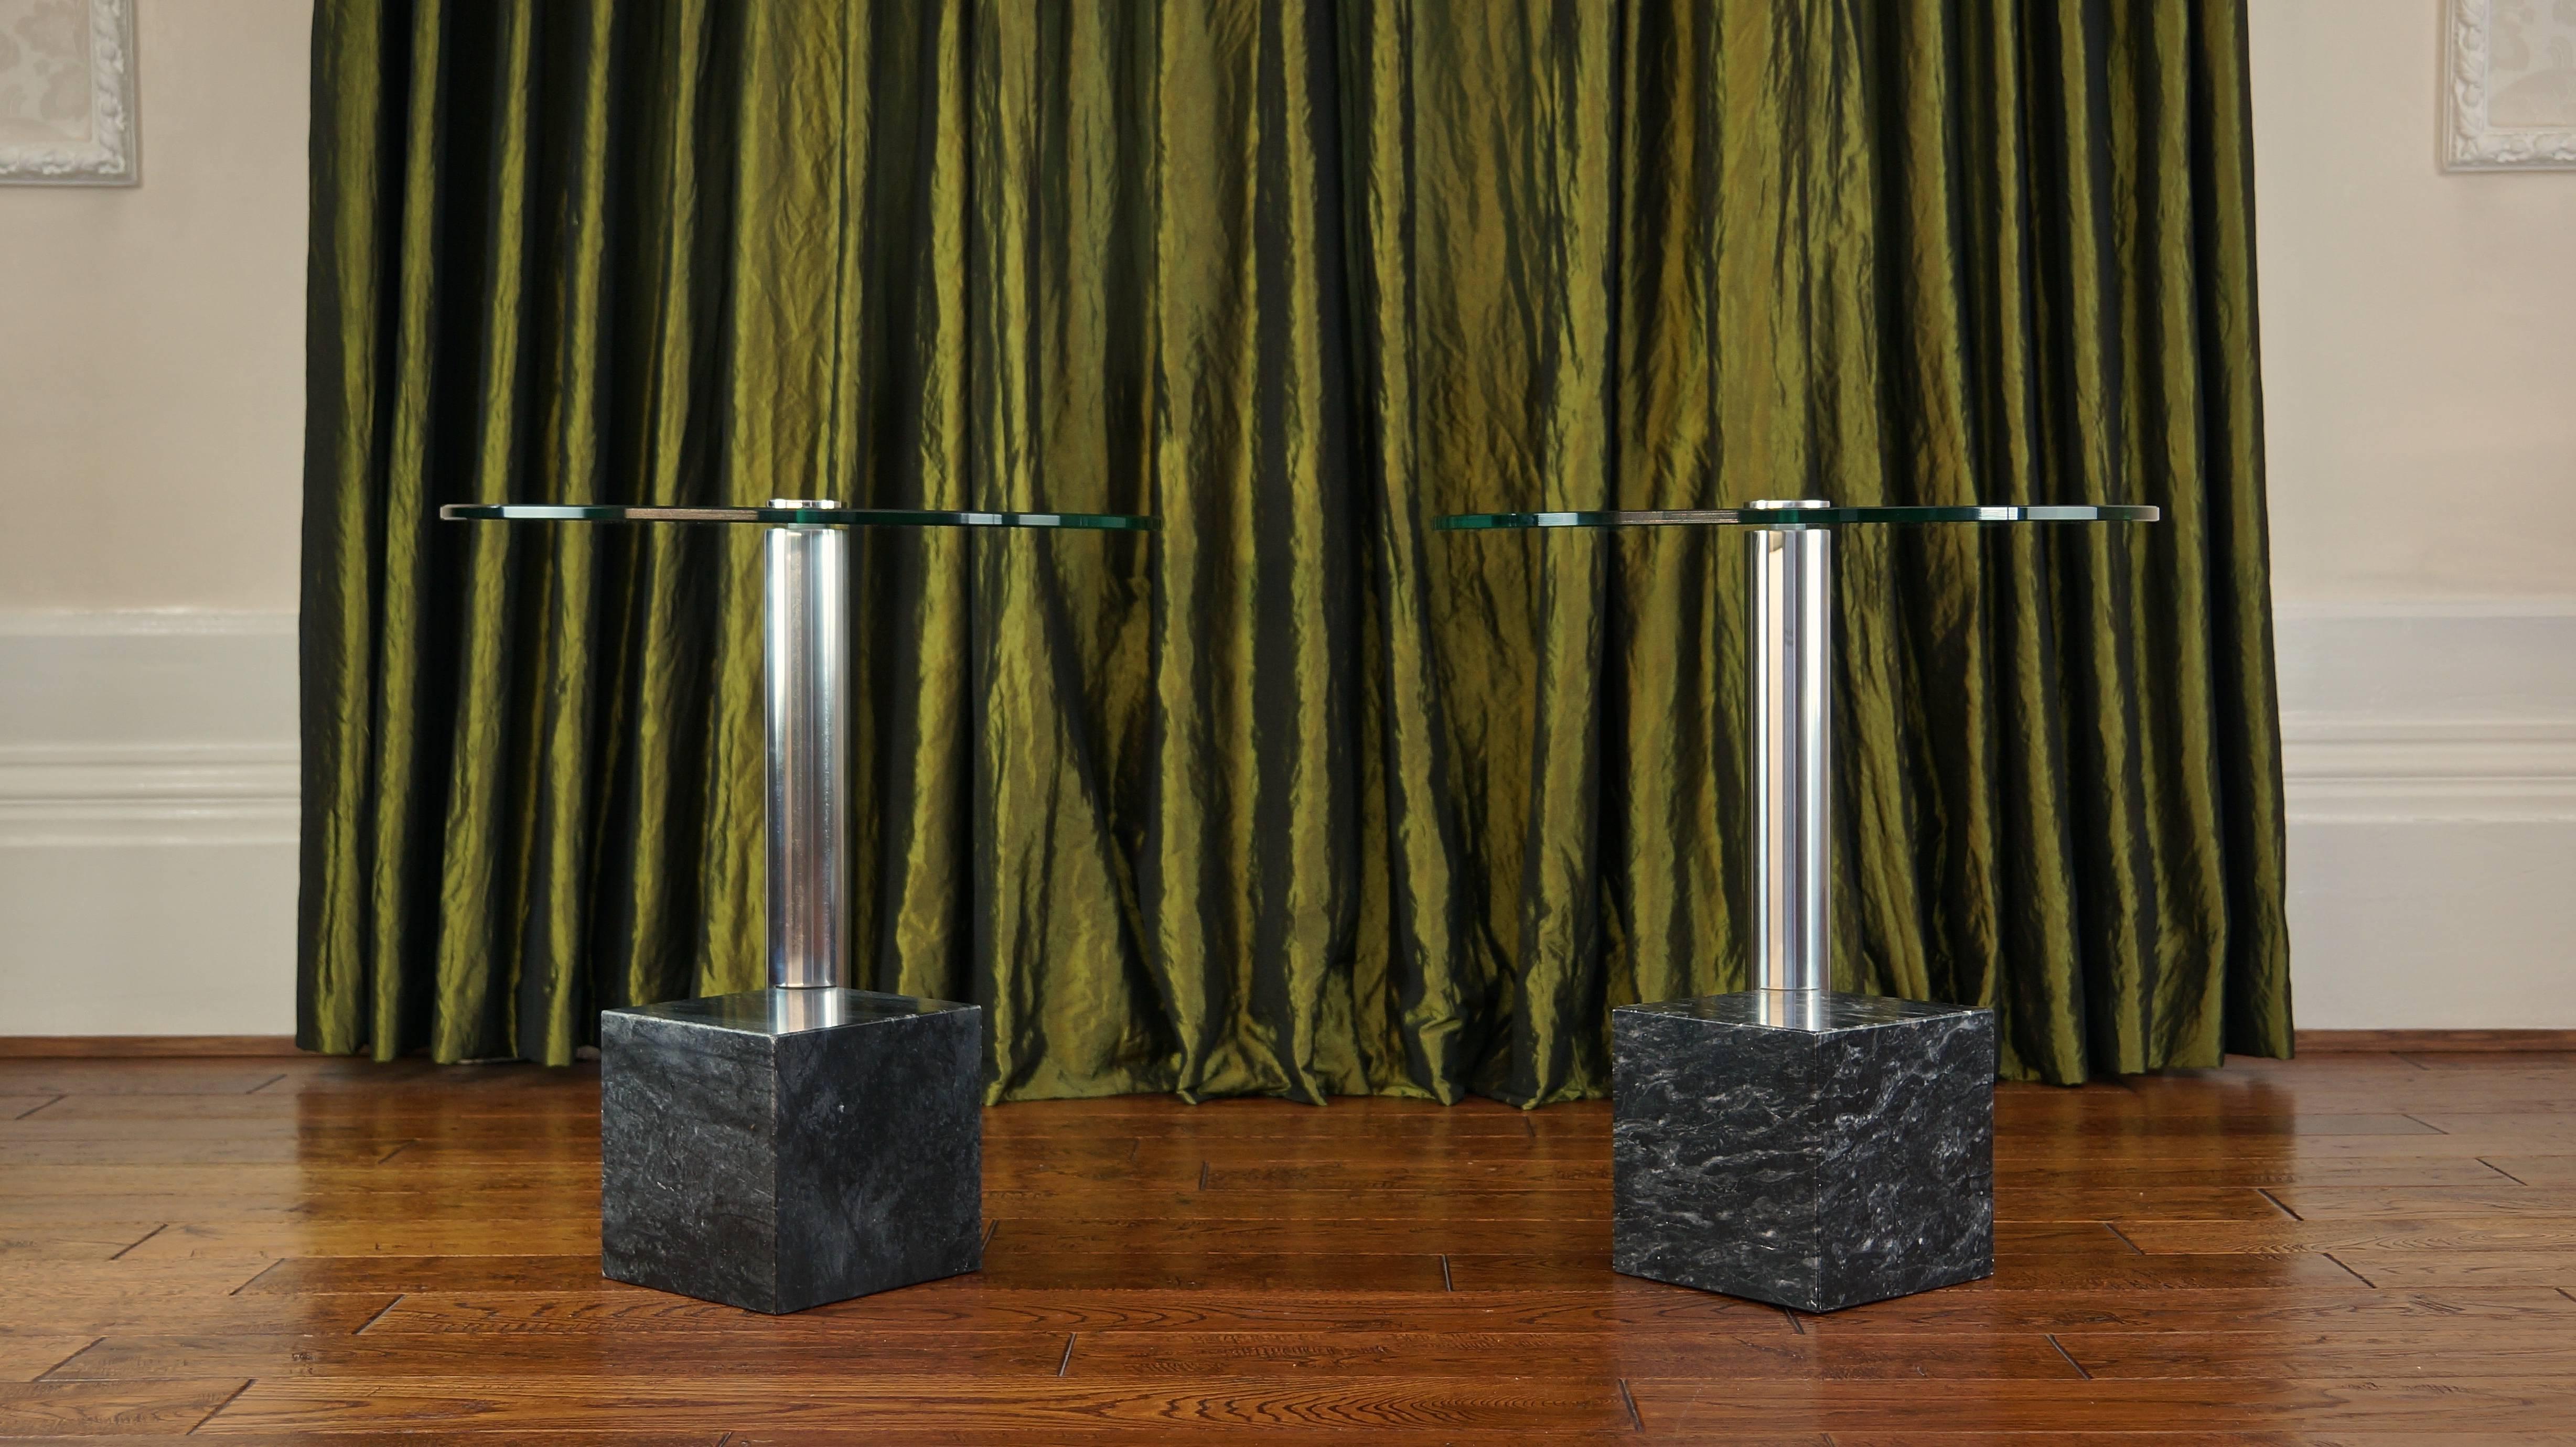 A pair of solid marble, stainless steel and glass HK2 side tables designed by Hank Kwint for Dutch makers Metaform dating from the 1980s.

These tables offer a clean, modern look and offer versatility due to the change in appearance depending on